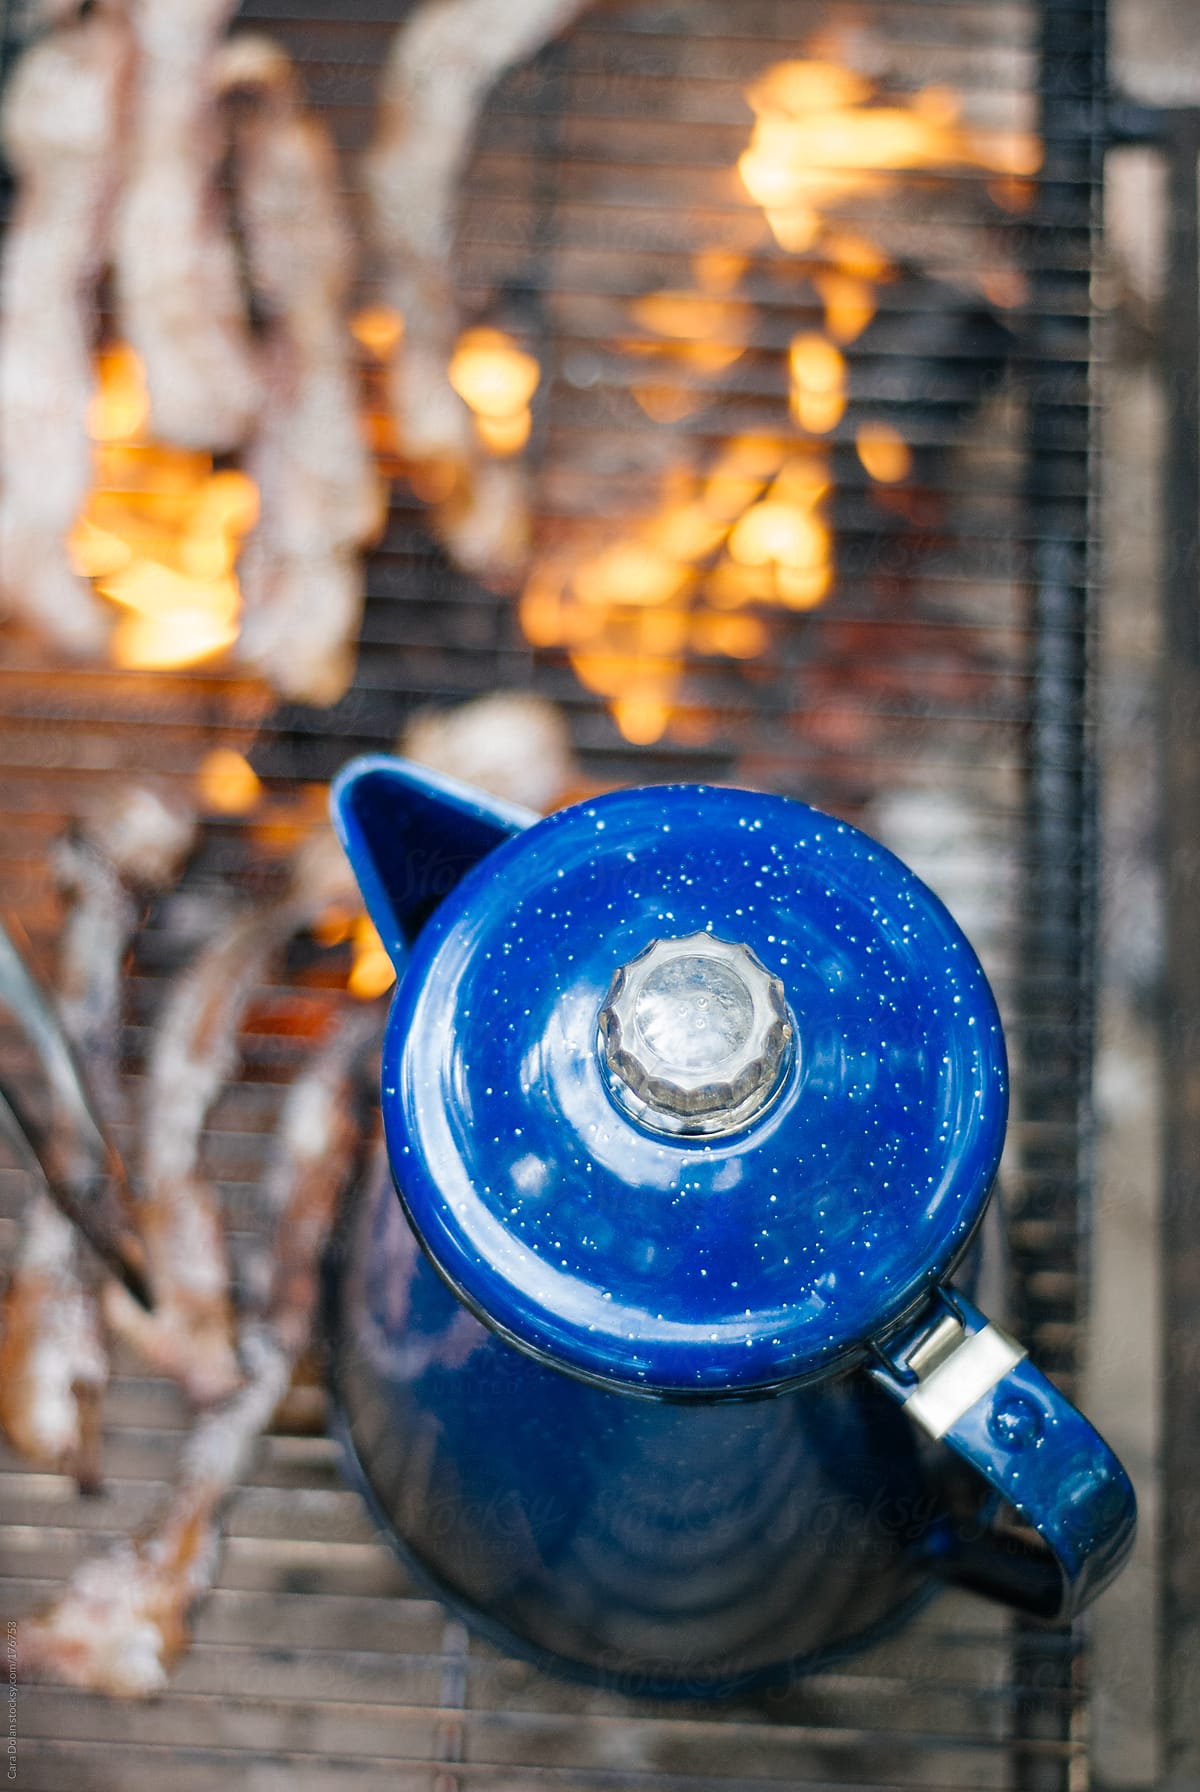 Coffee pot warms on a campfire while bacon cooks beside it